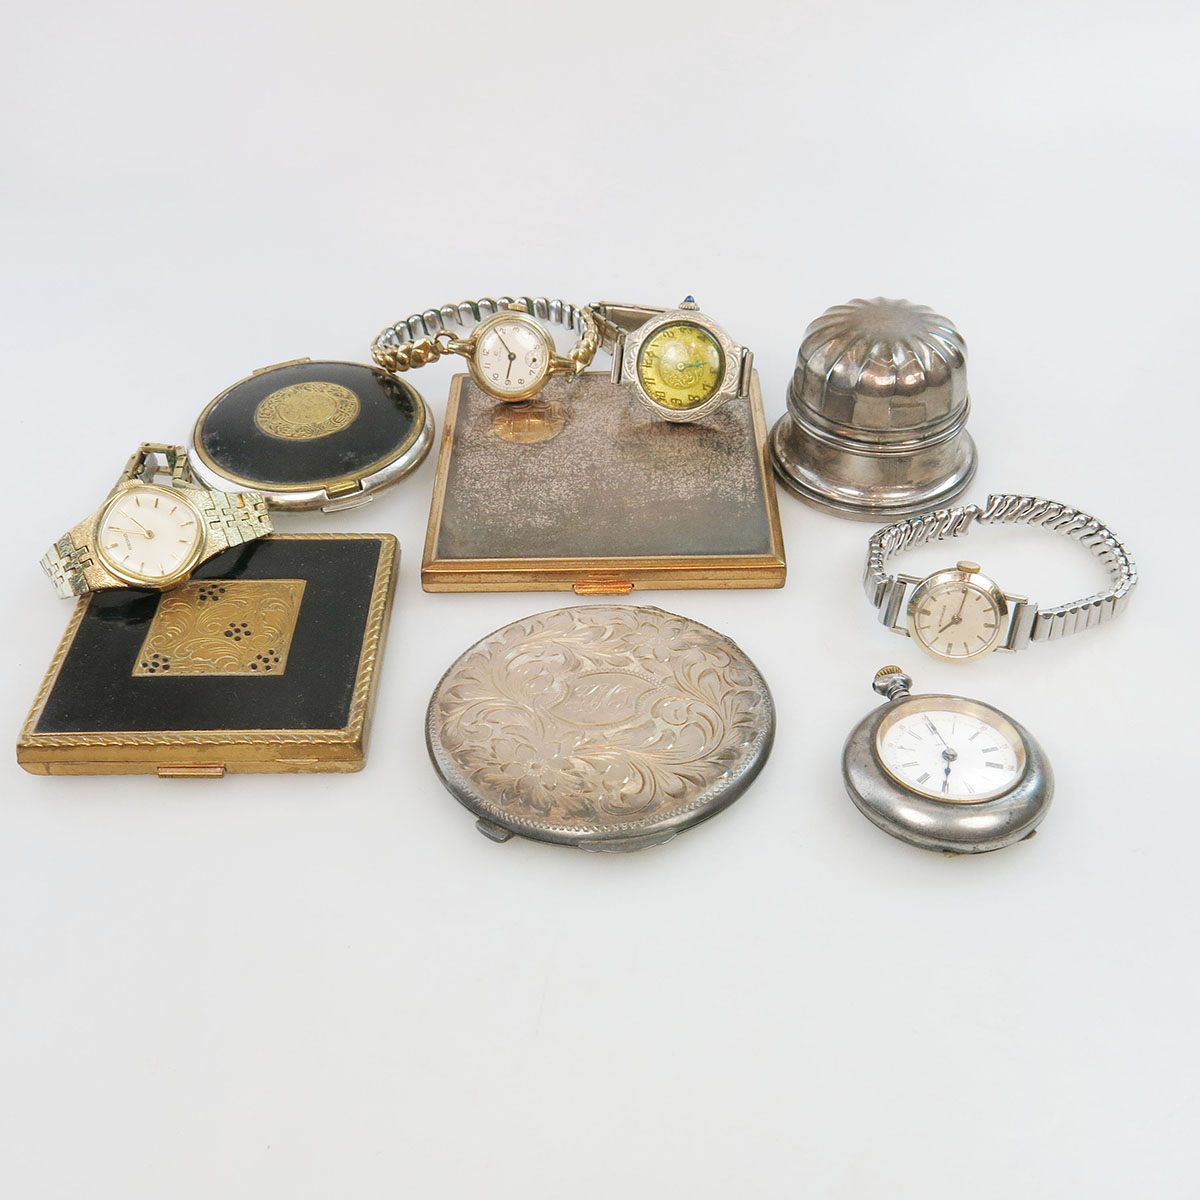 Small Quantity Of Watches, Compacts, Etc